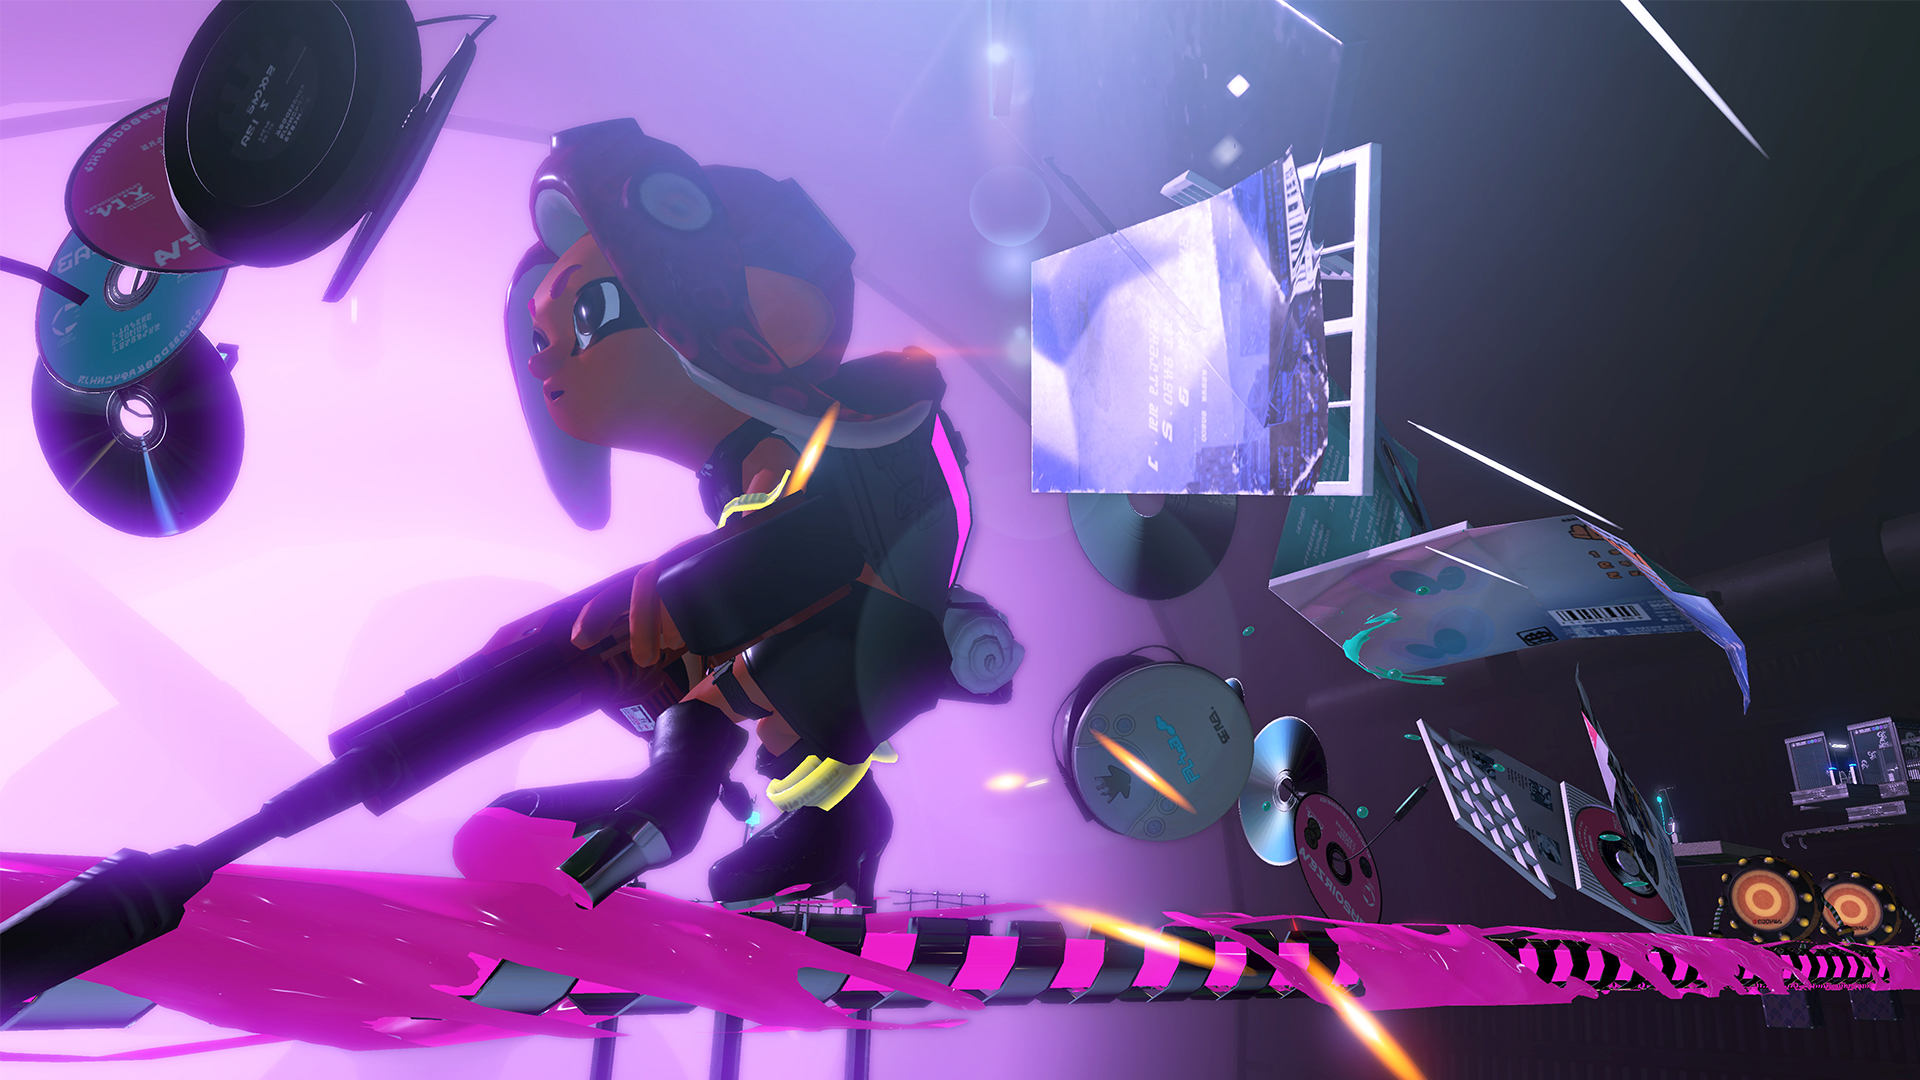 Agent 8 in the cryptic underground world of the Octo Expansion